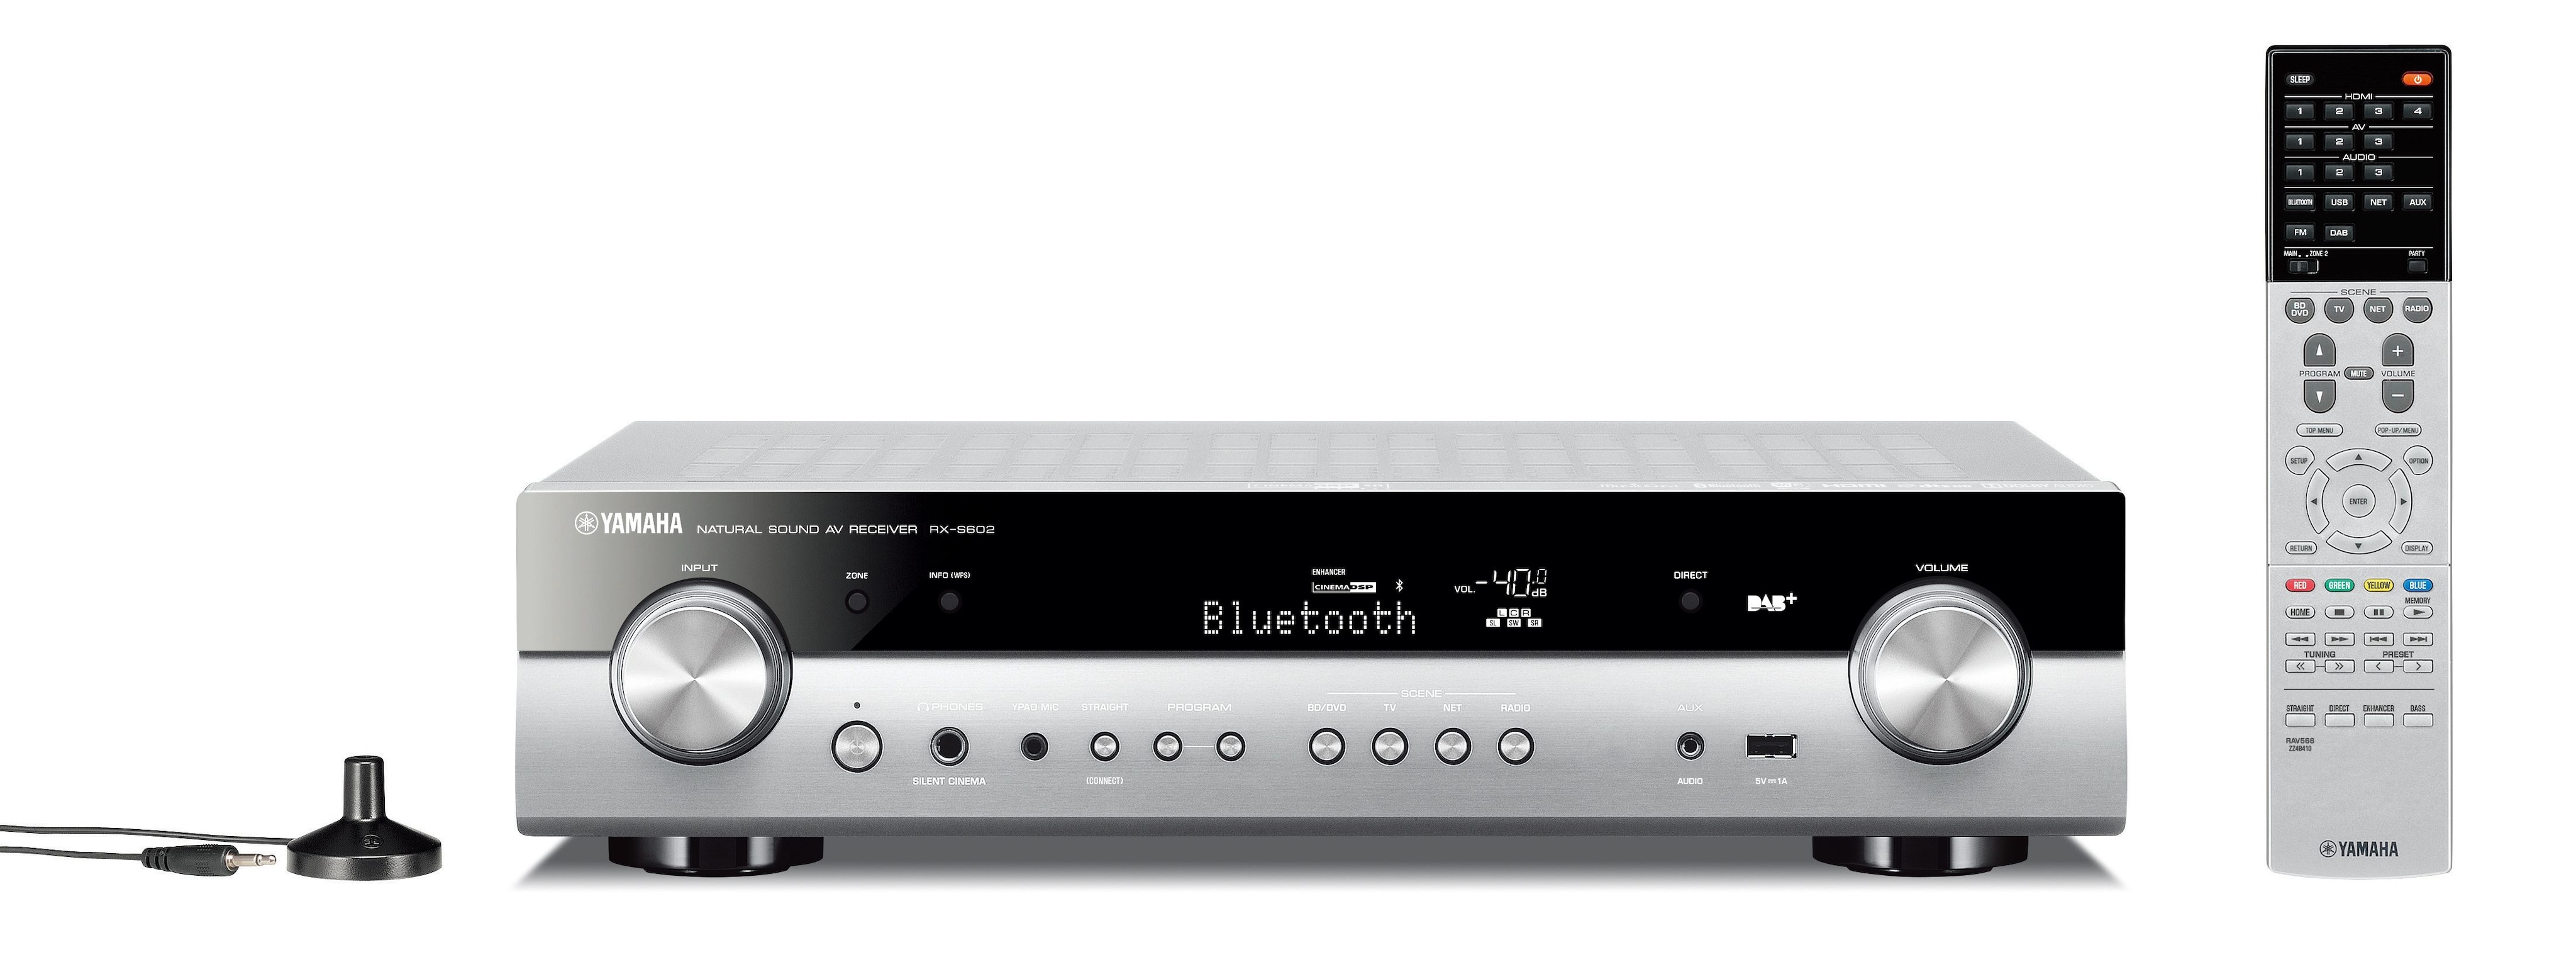 RX-S602 - Overview - AV Receivers - Audio & Visual - Products 